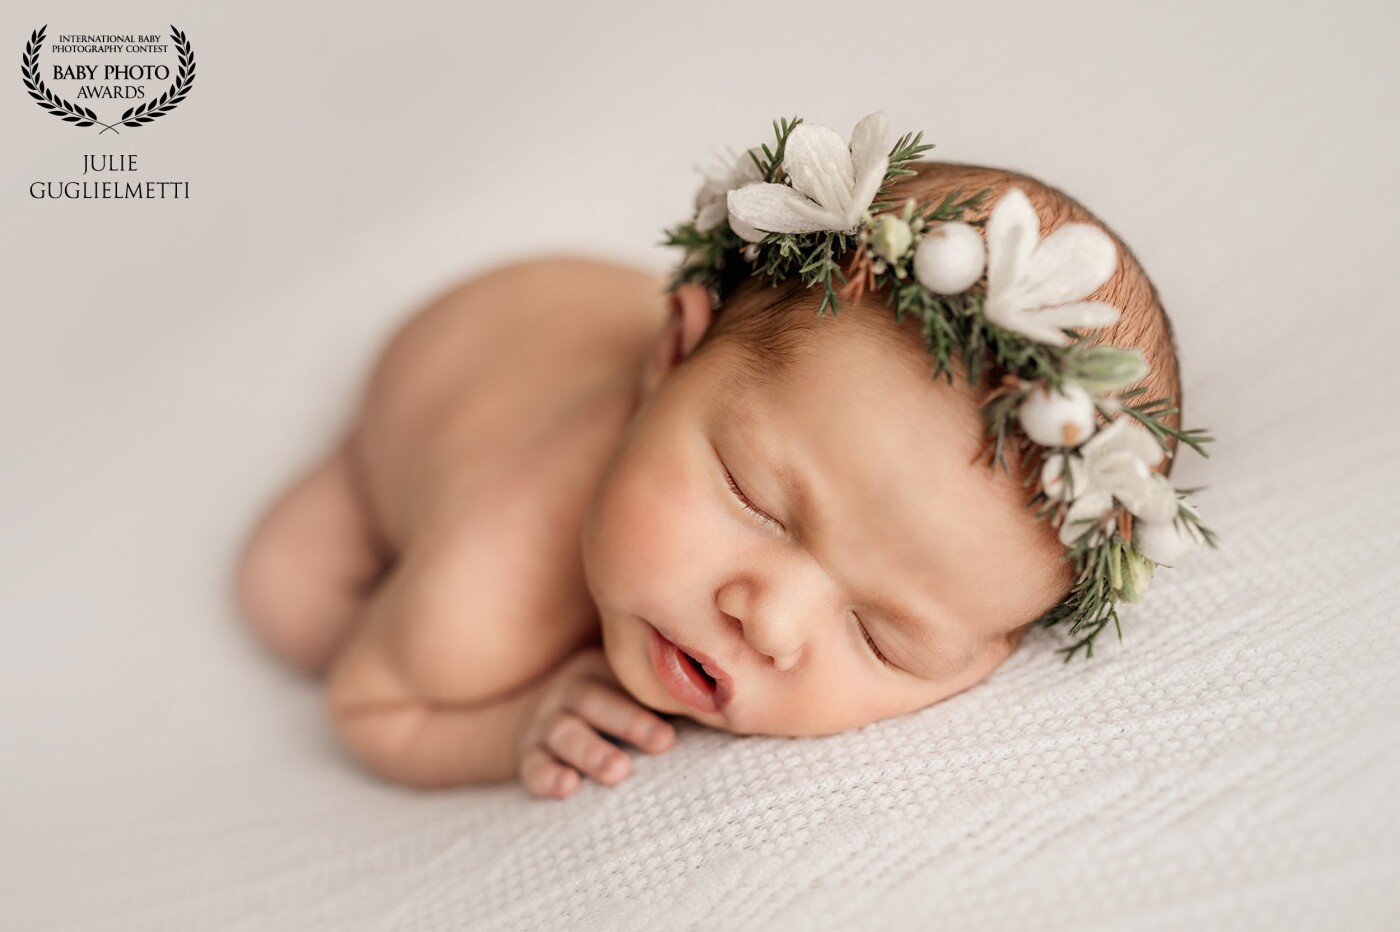 Little forest fairy. Sometimes it takes just one small element for the photo to stand out. Less is more, especially in newborn photography...